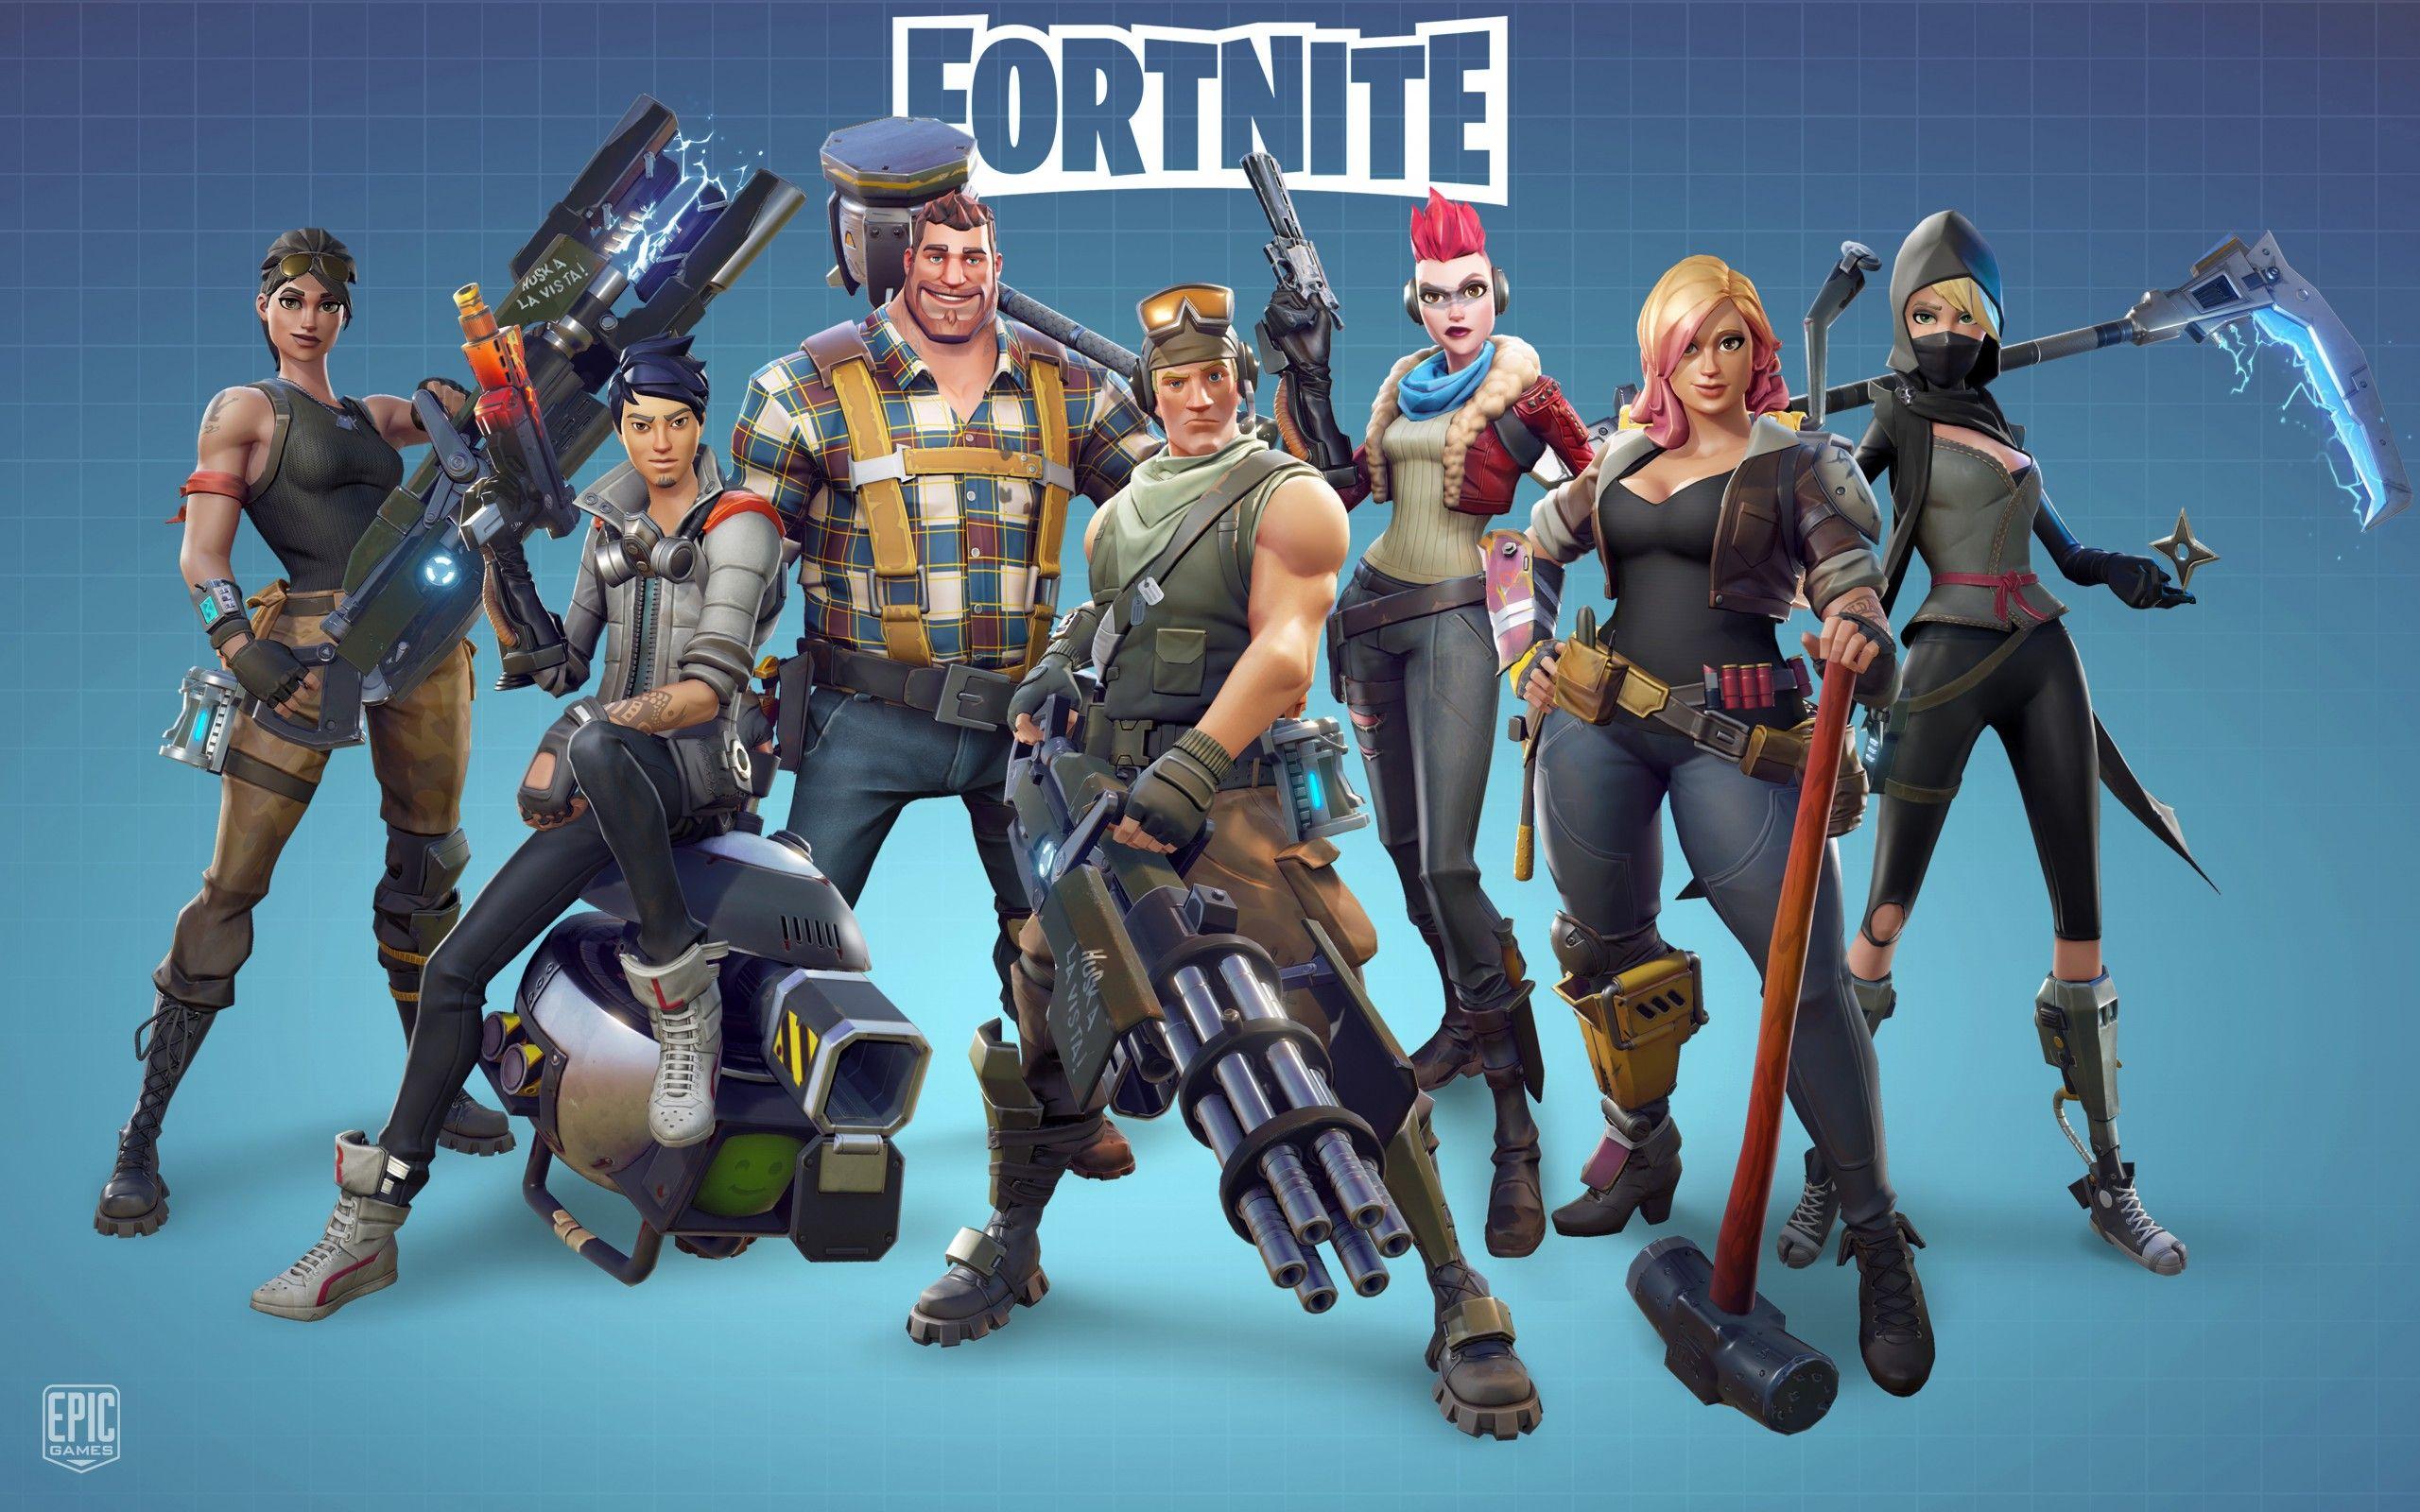 Fortnite Video Game Wallpaper Background 62256 2560x1600px